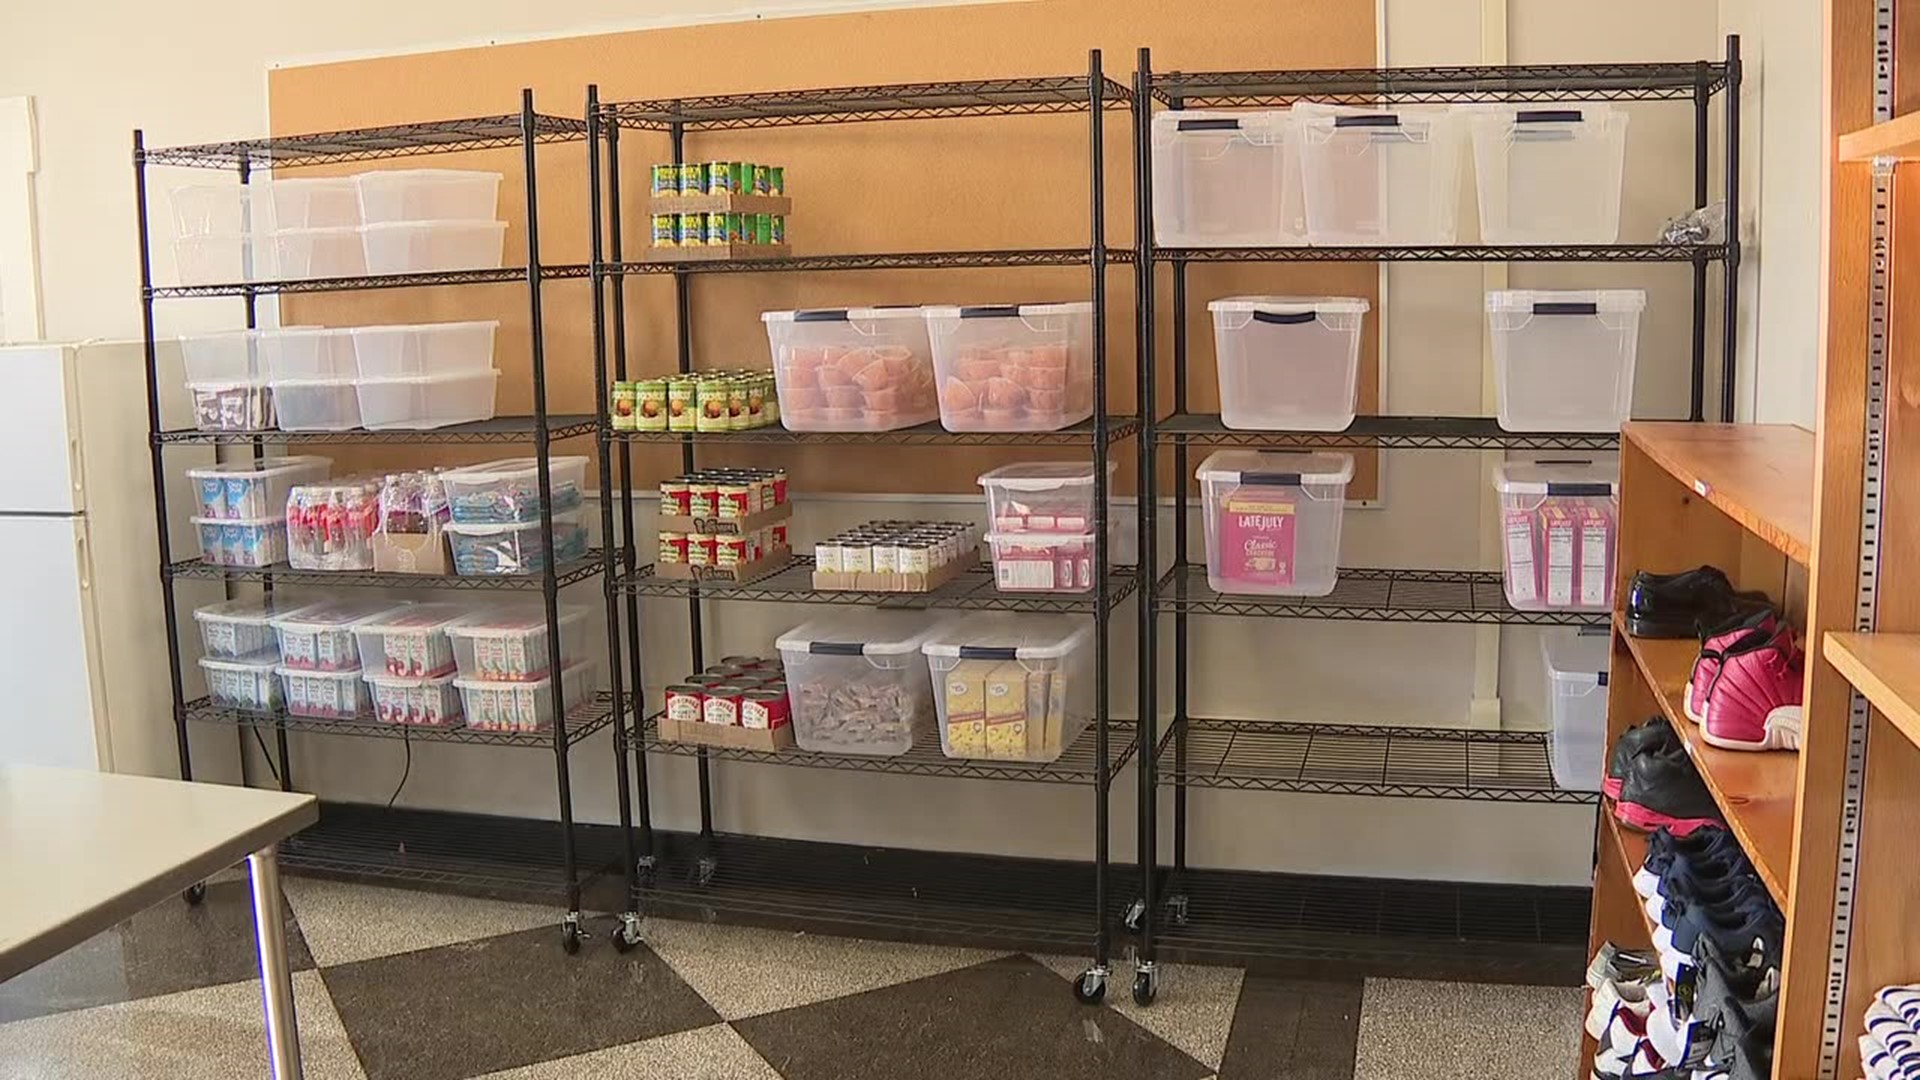 A school district in Northumberland County is helping families make healthy food choices with its new food pantry.